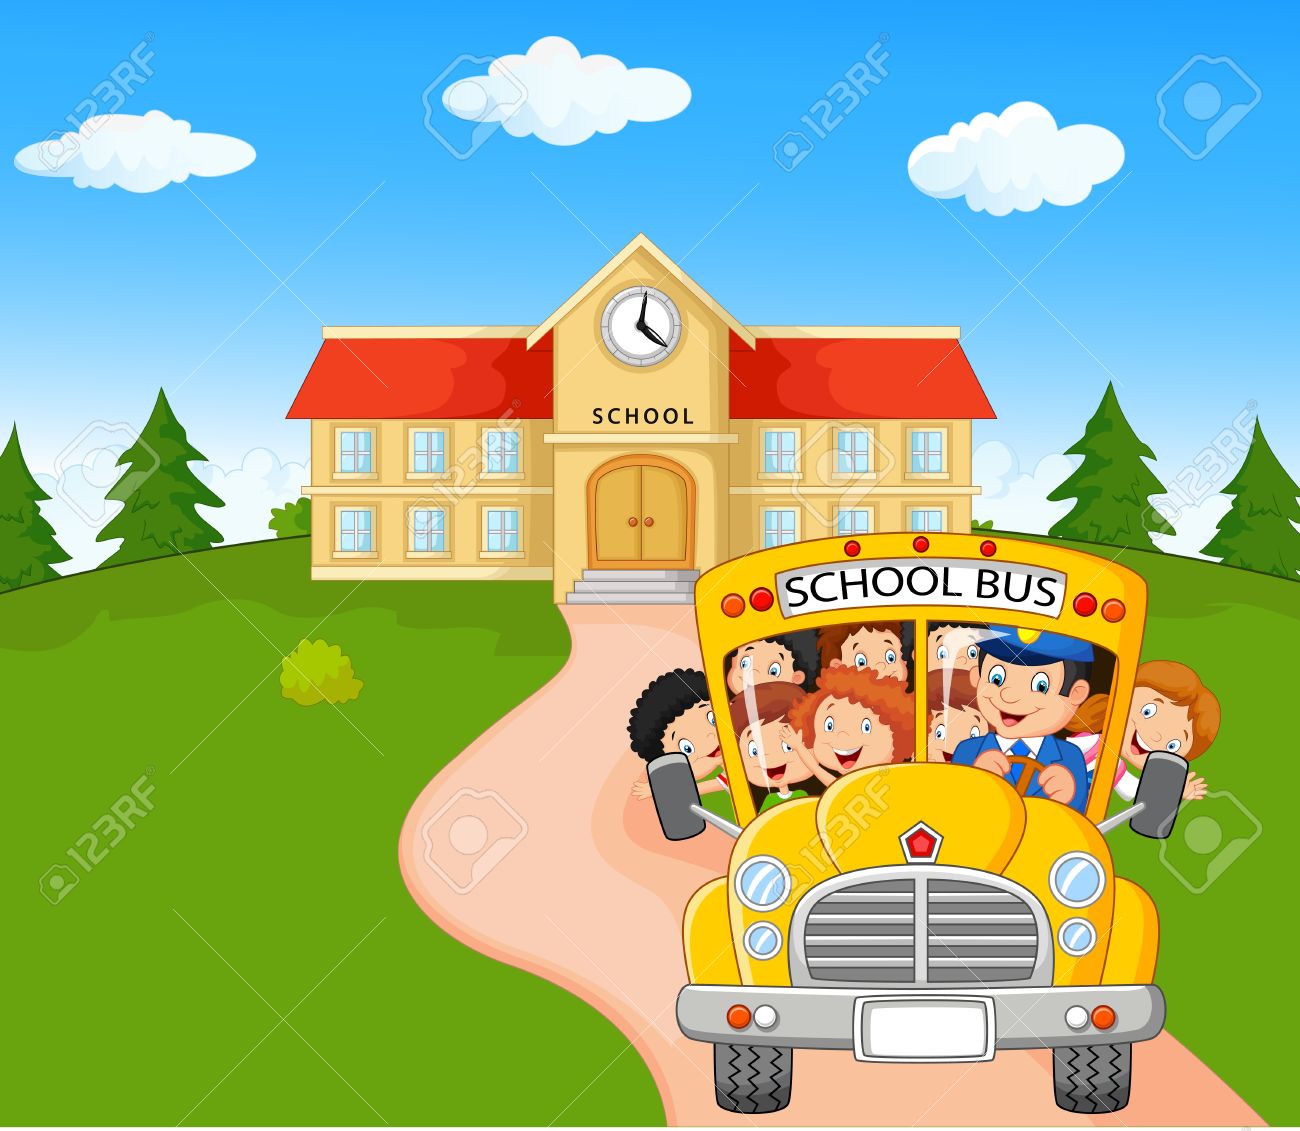 Going home from school clipart